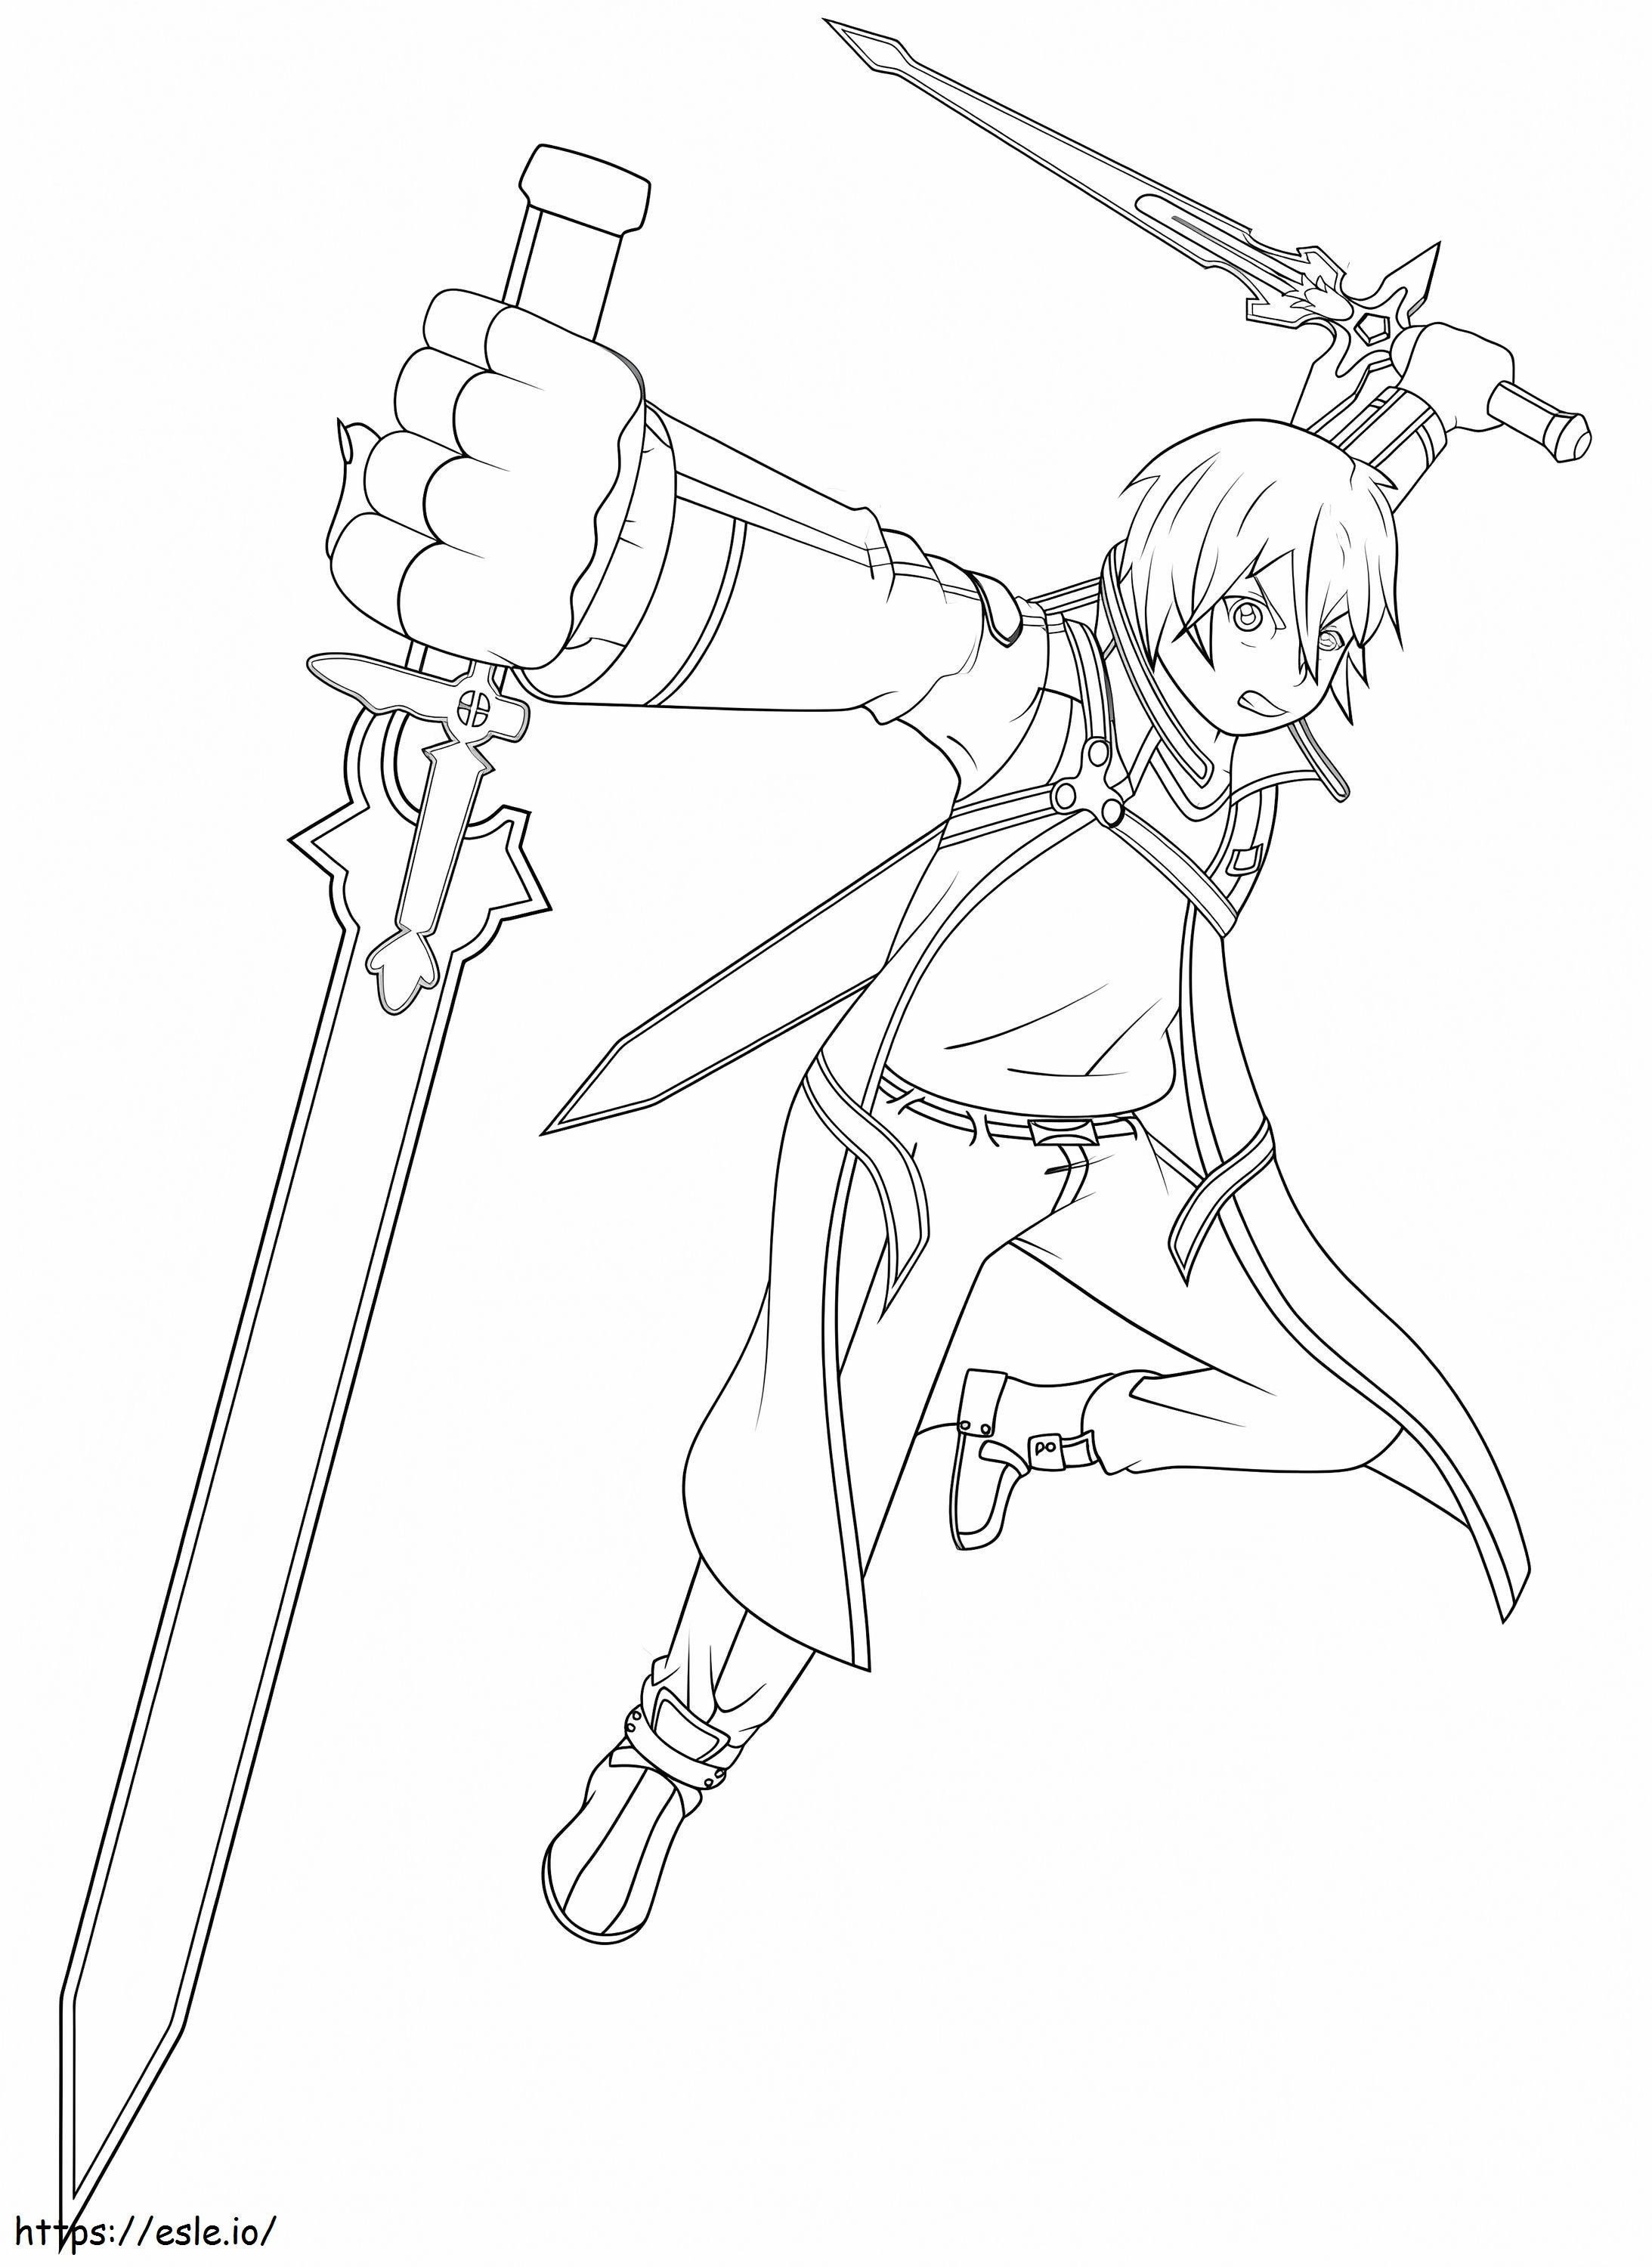 Kirito With Two Swords 1 coloring page